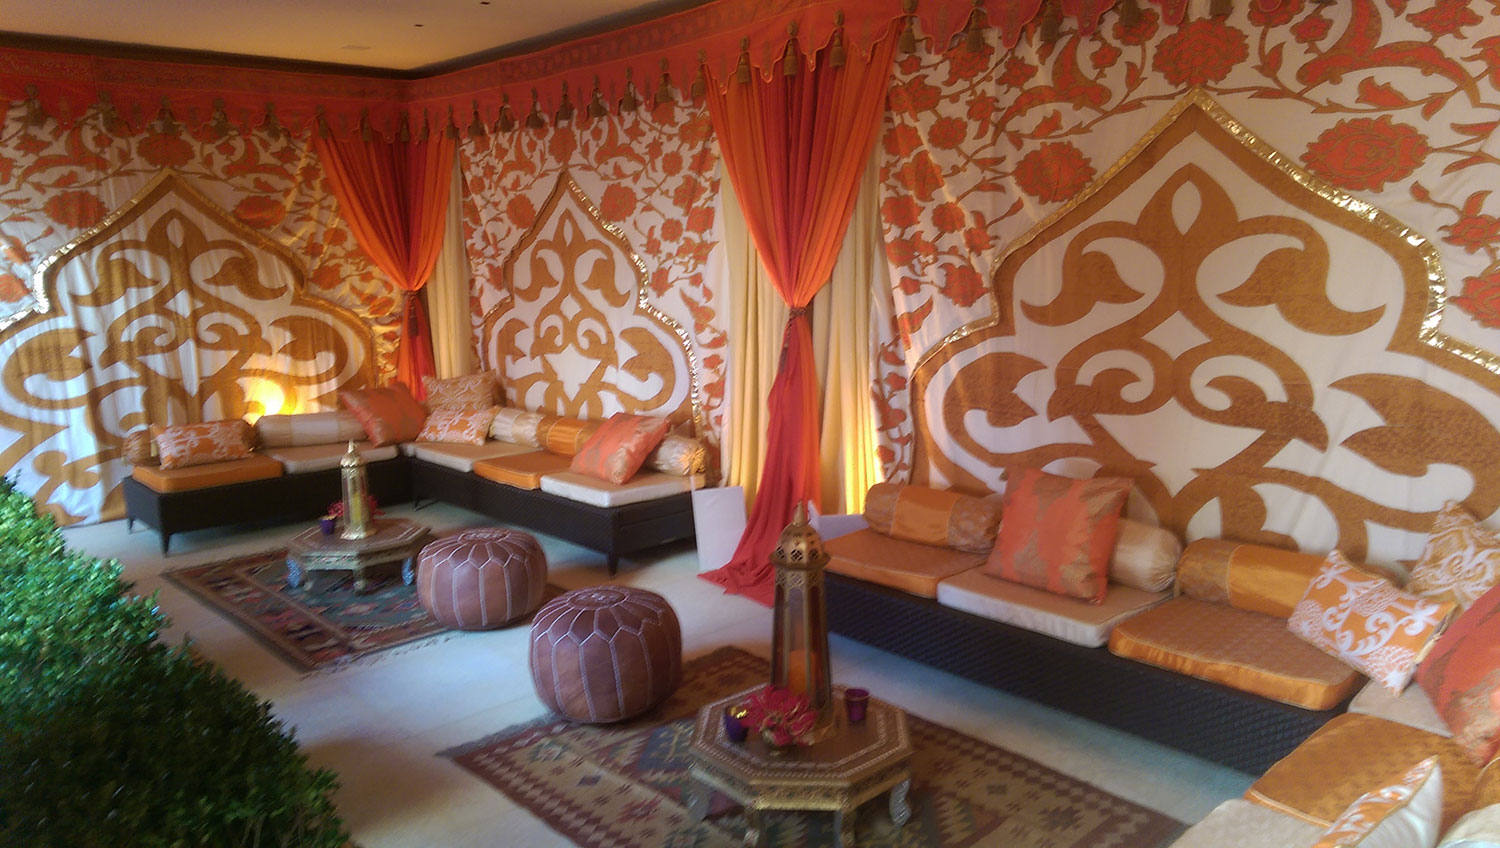 raj-tents-furniture-lounge-with-mughal-arches.jpg